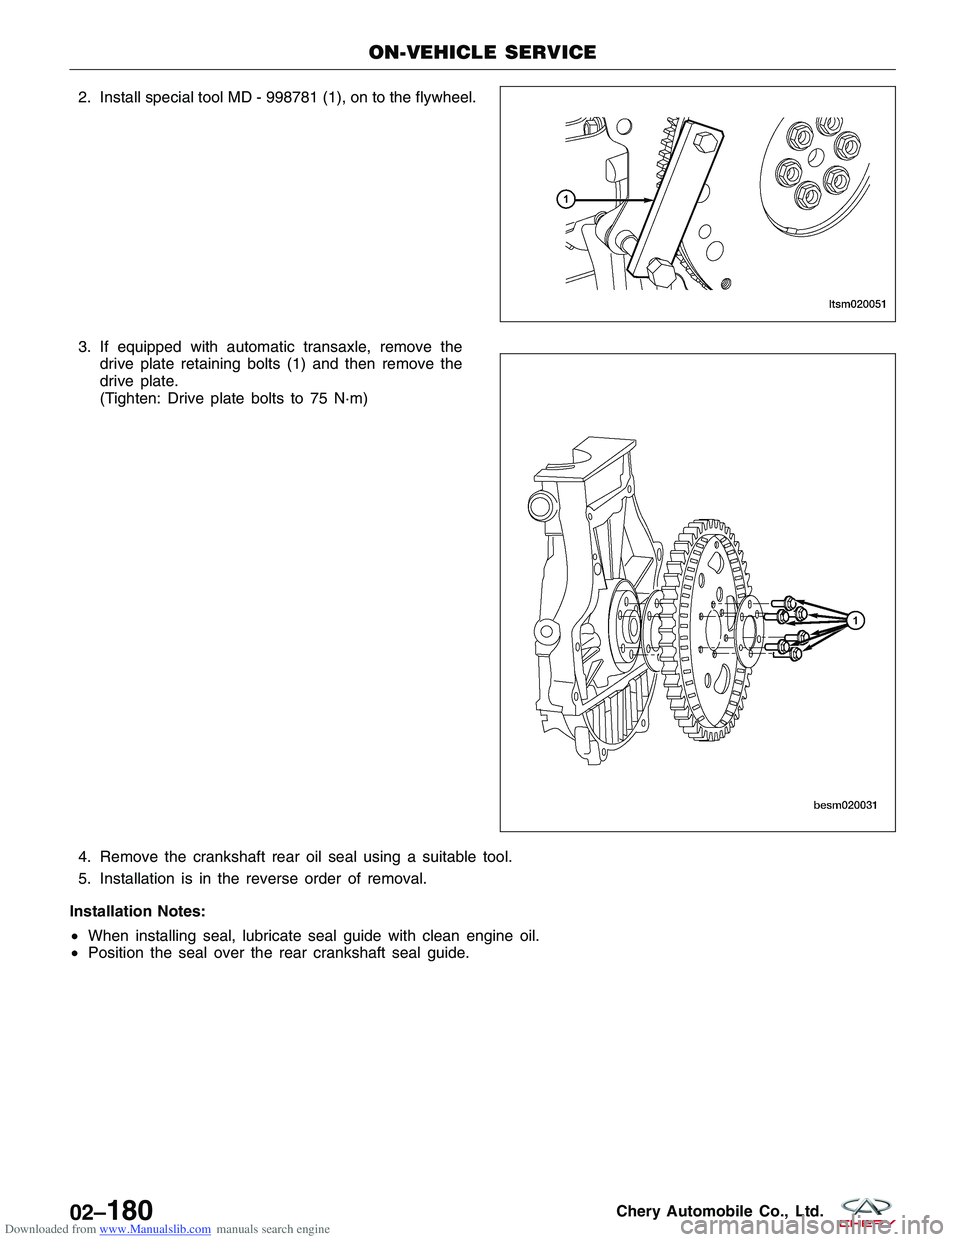 CHERY TIGGO 2009  Service Repair Manual Downloaded from www.Manualslib.com manuals search engine 2. Install special tool MD - 998781 (1), on to the flywheel.flywheel.
3. If equipped with automatic transaxle, remove the drive plate retaining